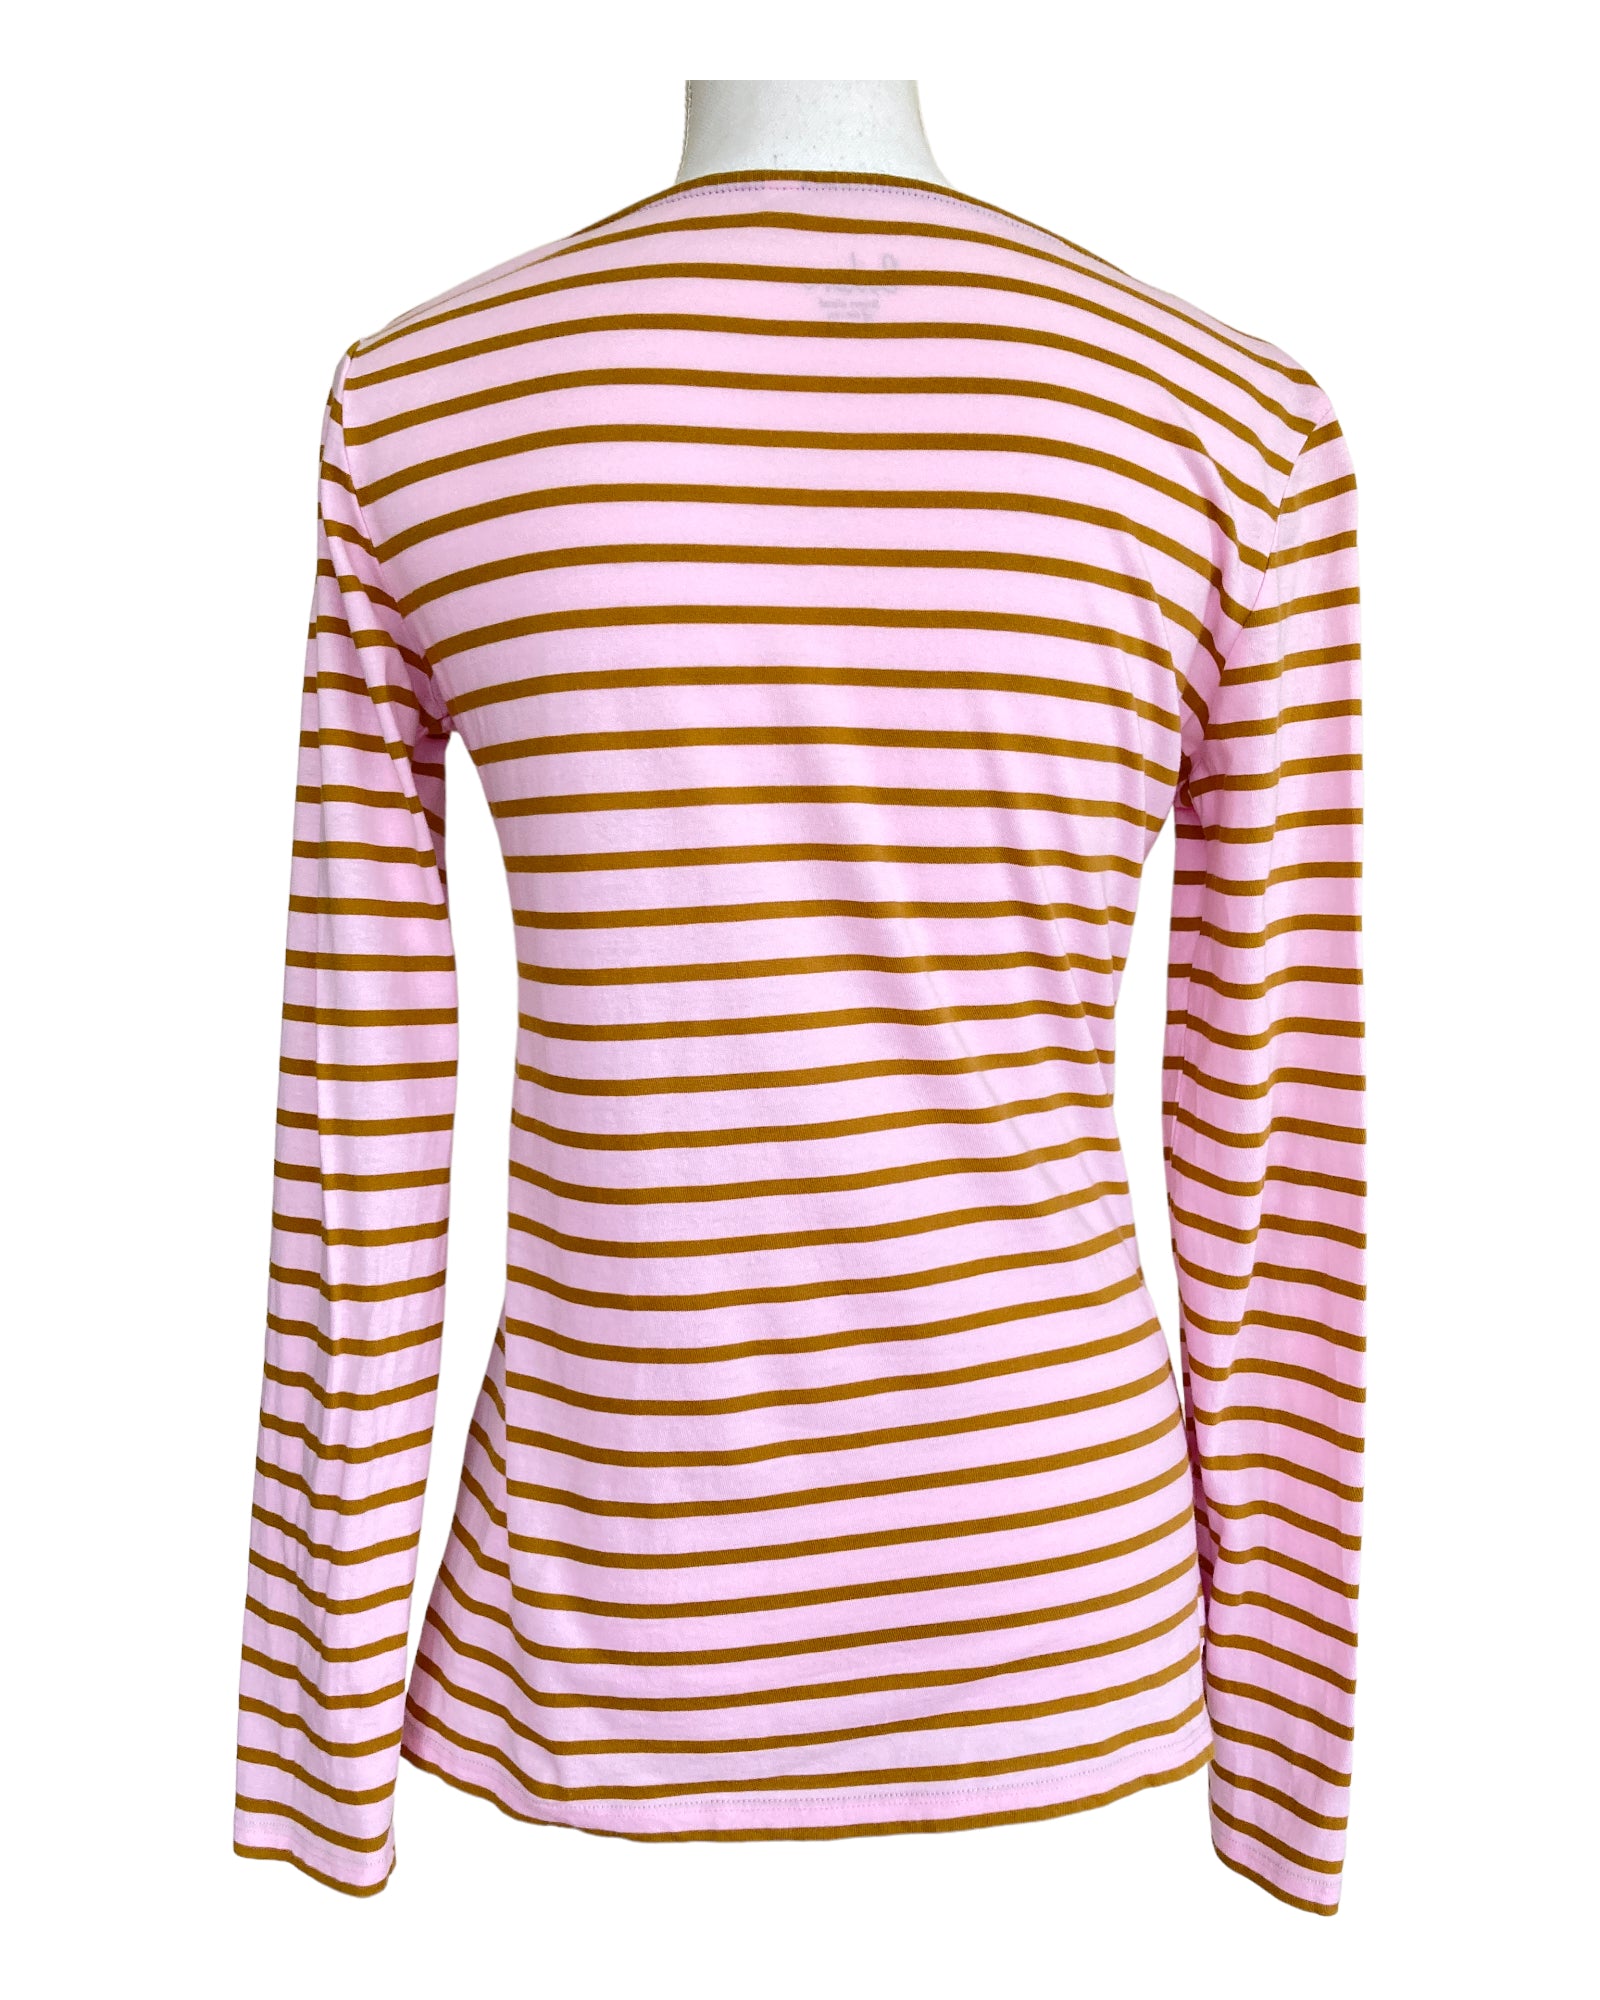 Boden Pink and Brown Striped T-Shirt, 4